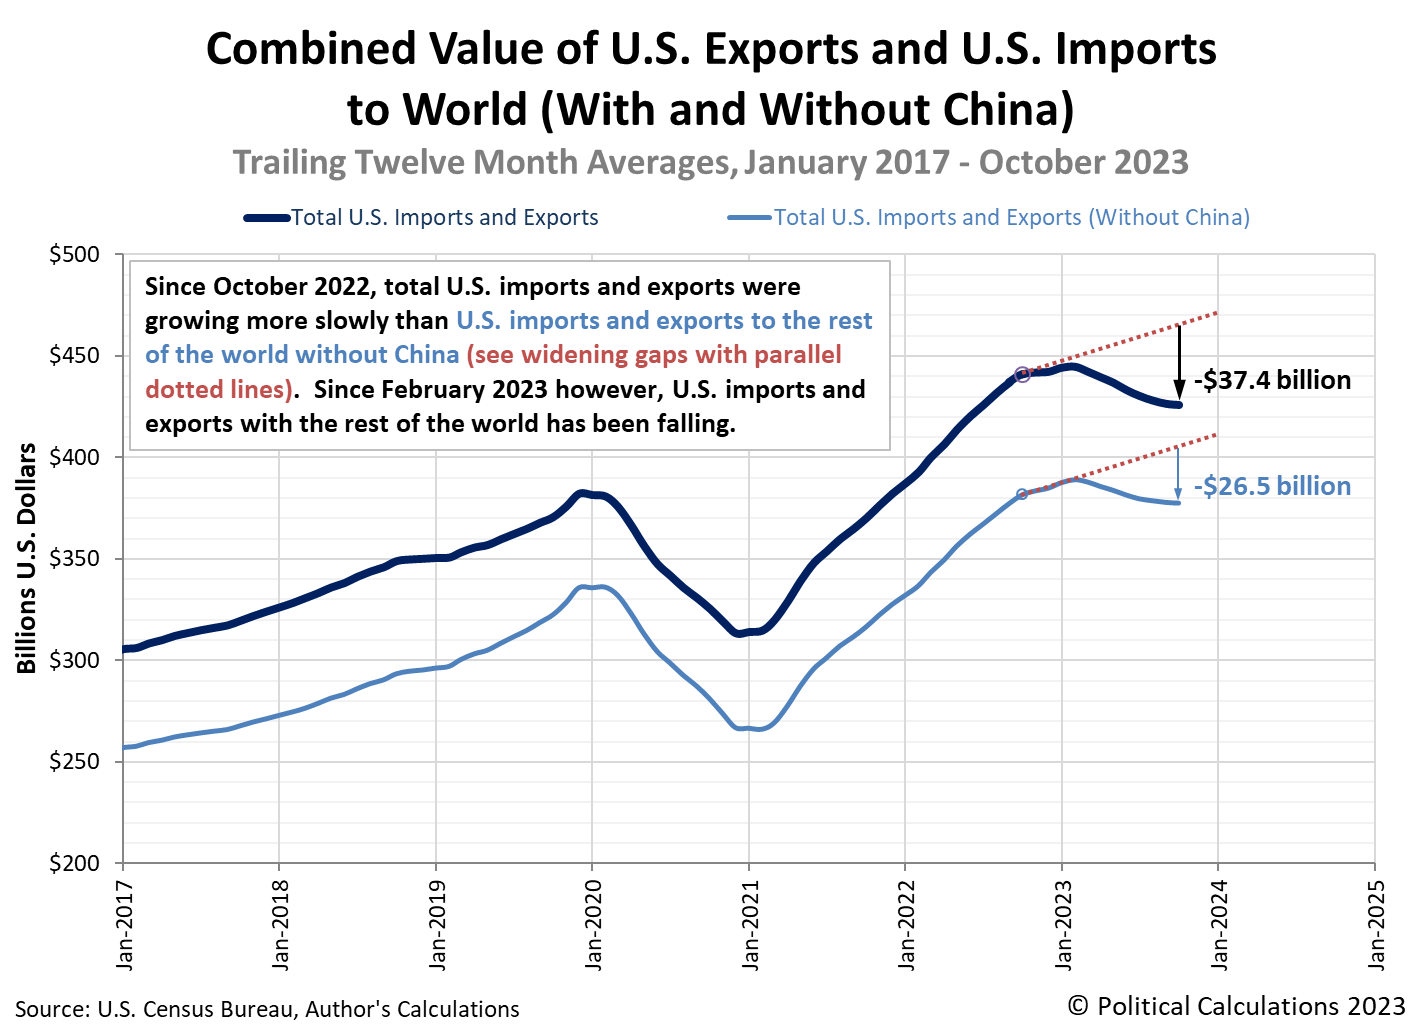 Combined Value of U.S. Exports and U.S. Imports and U.S. Imports to World, with and without China, January 2017 - October 2023